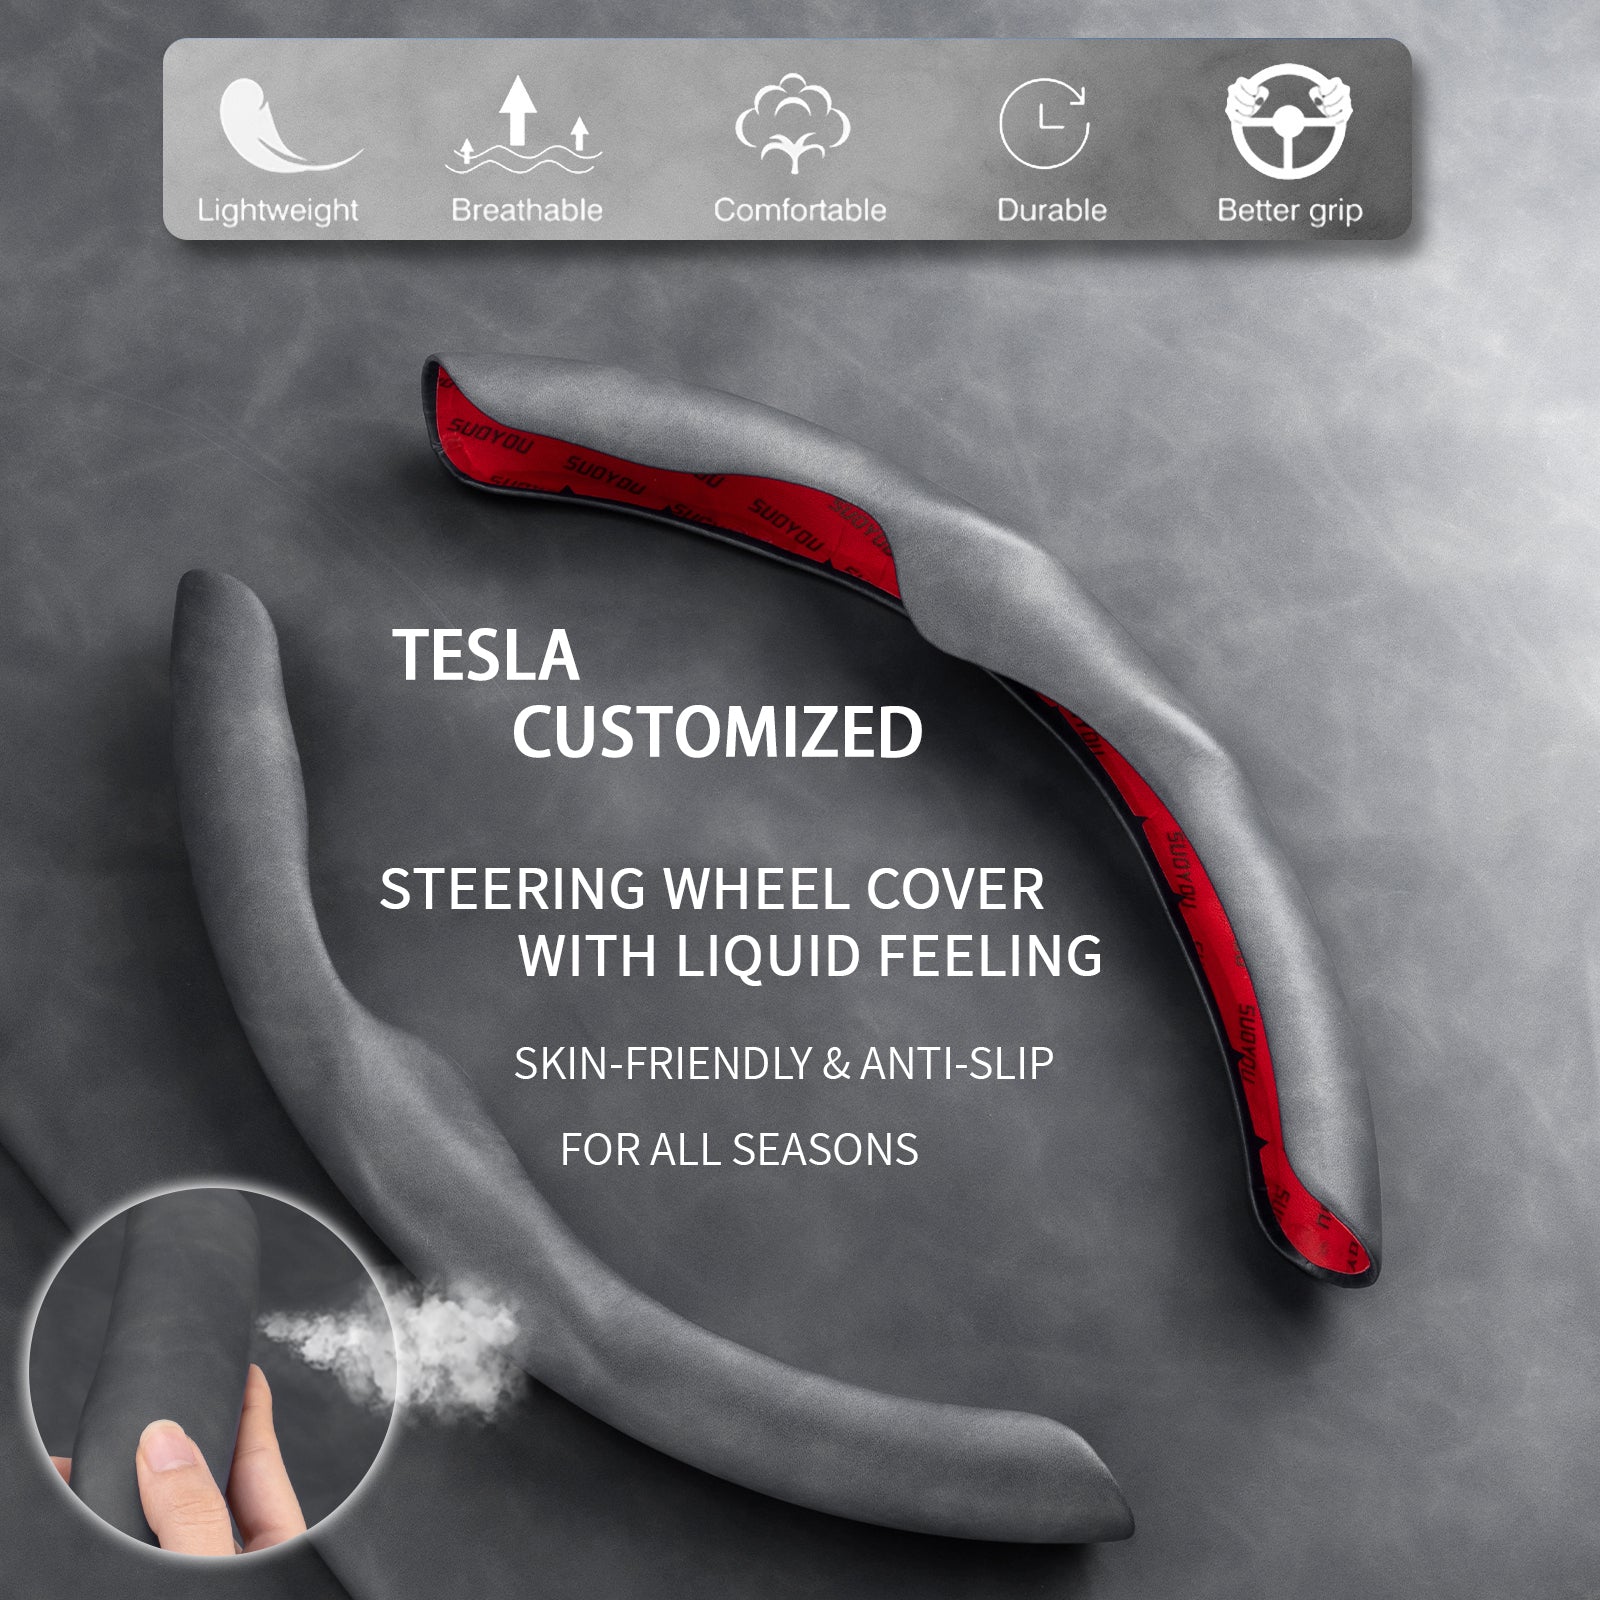 tesla model 3 Y car 2022 2023 2021 2020 2019 2018 s3xy Segmented Steering Wheel Liquid Leather Cover Cover arcoche accessories accessory aftermarket price Vehicles standard long range performance sr+ electric car rwd ev interior exterior diy decoration price elon musk must have black white red blue 5 7 seats seat